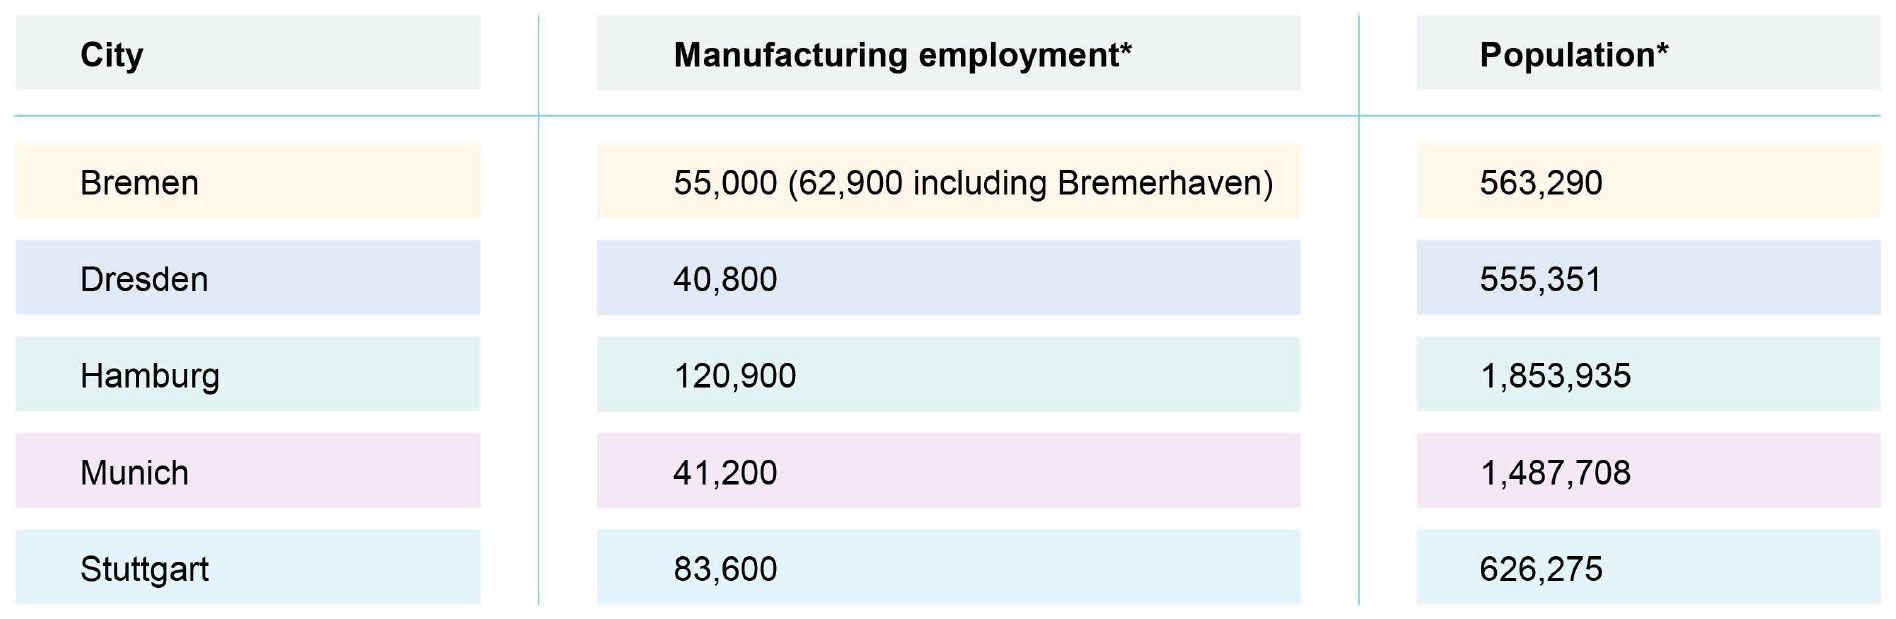 In this table an overview over the manufacturing employment as well as the population across the different case study cities is given.